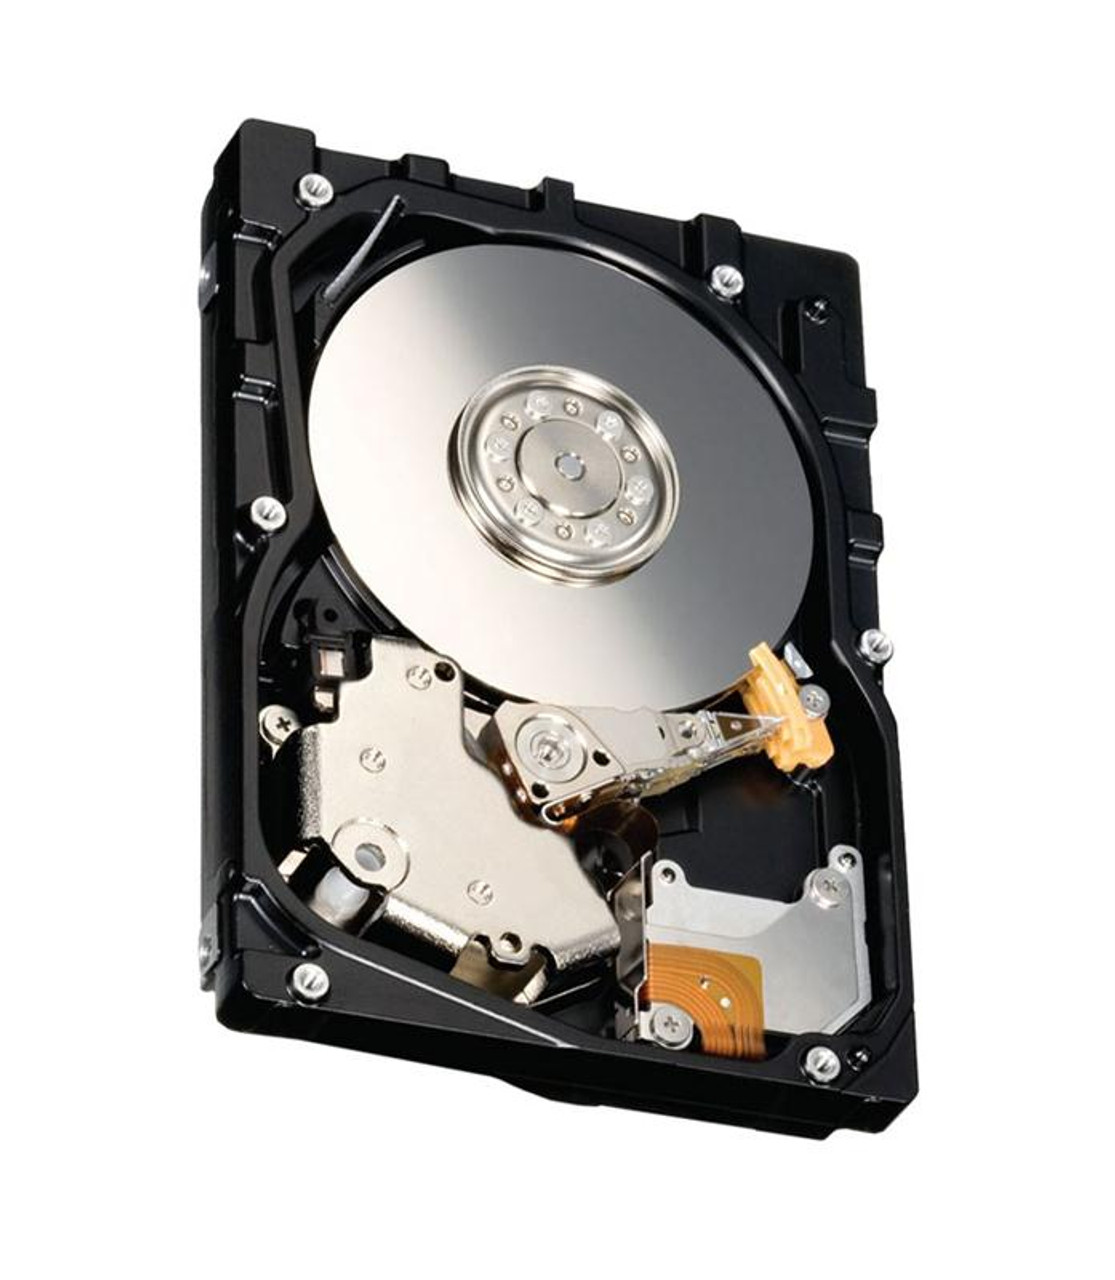 49Y7433 - IBM 300GB 15000RPM SAS 6GB/s 2.5-inch SFF Hot Swapable Hard Drive with Tray